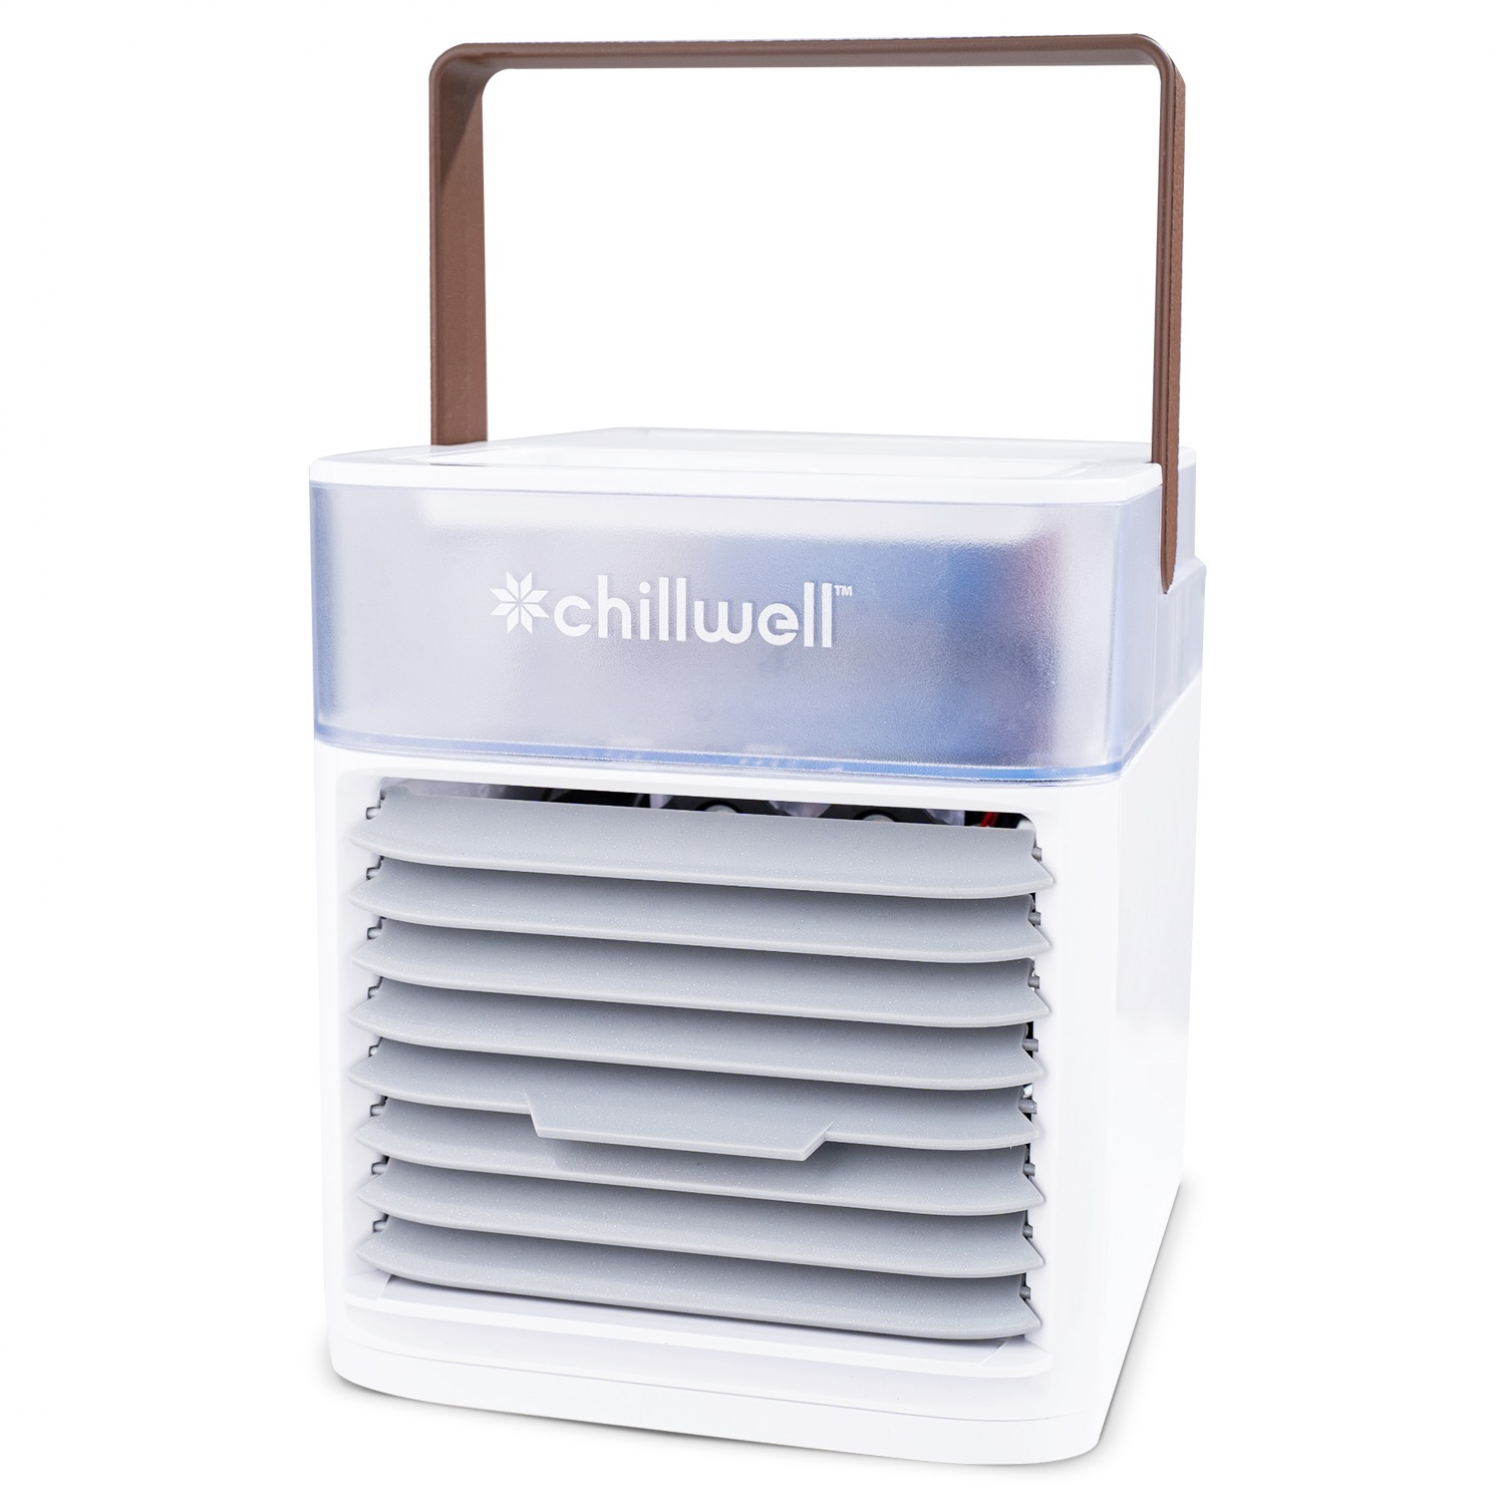 Chillwell AC Chill Air Conditioner